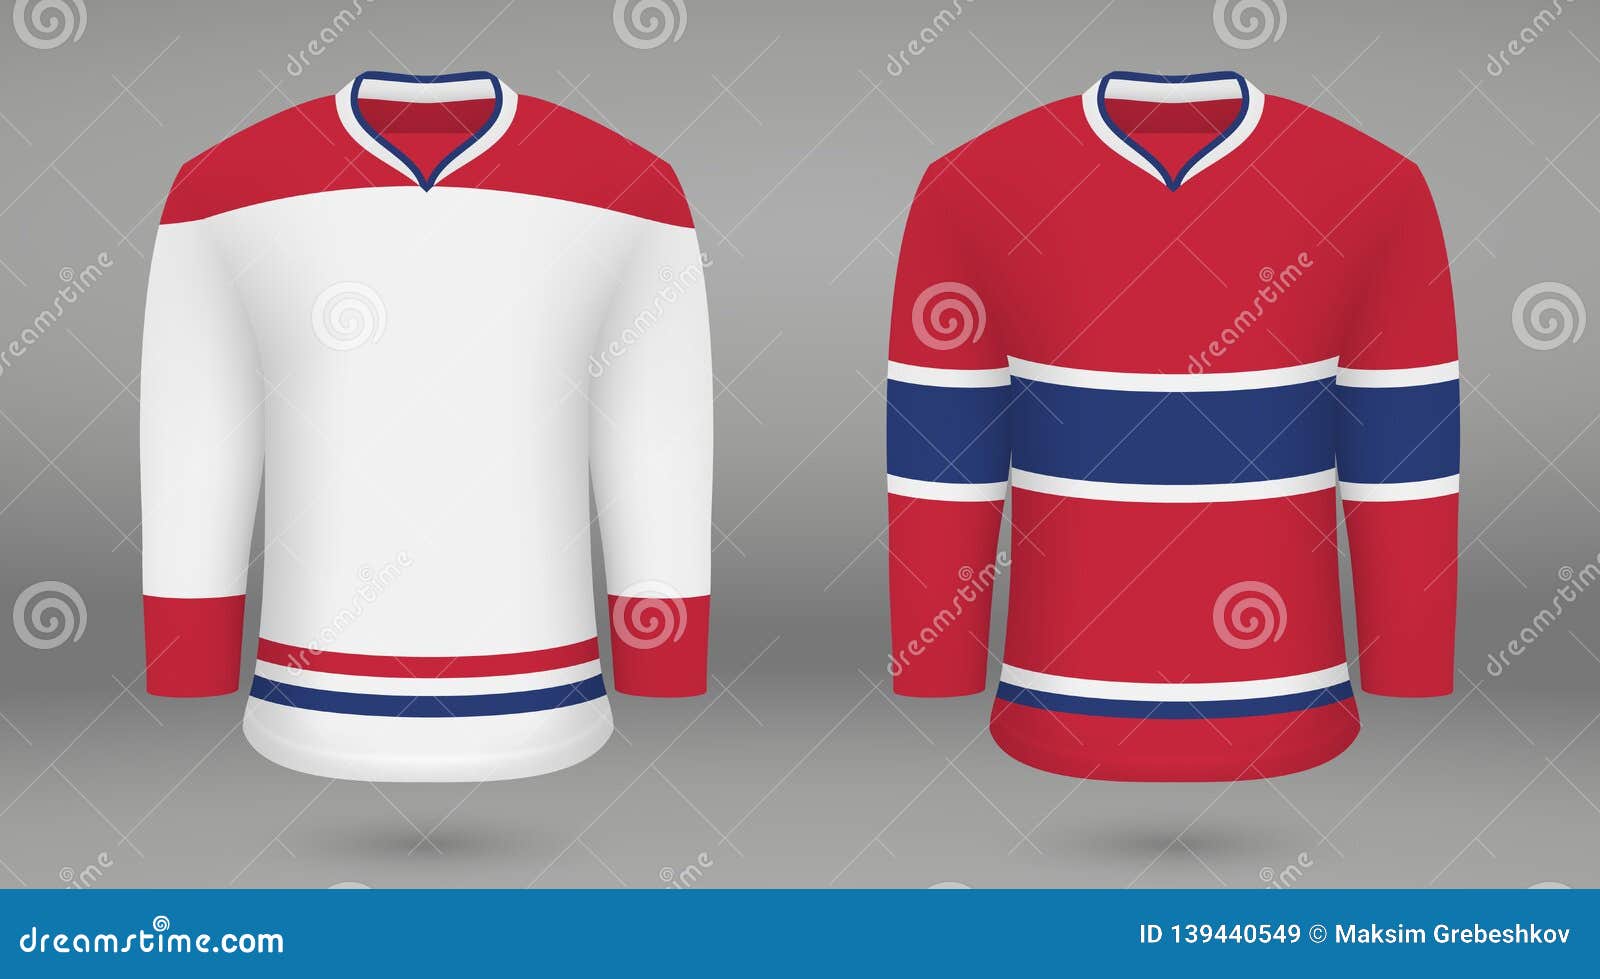 Montreal Canadiens Logo Stock Illustrations – 9 Montreal Canadiens Logo  Stock Illustrations, Vectors & Clipart - Dreamstime